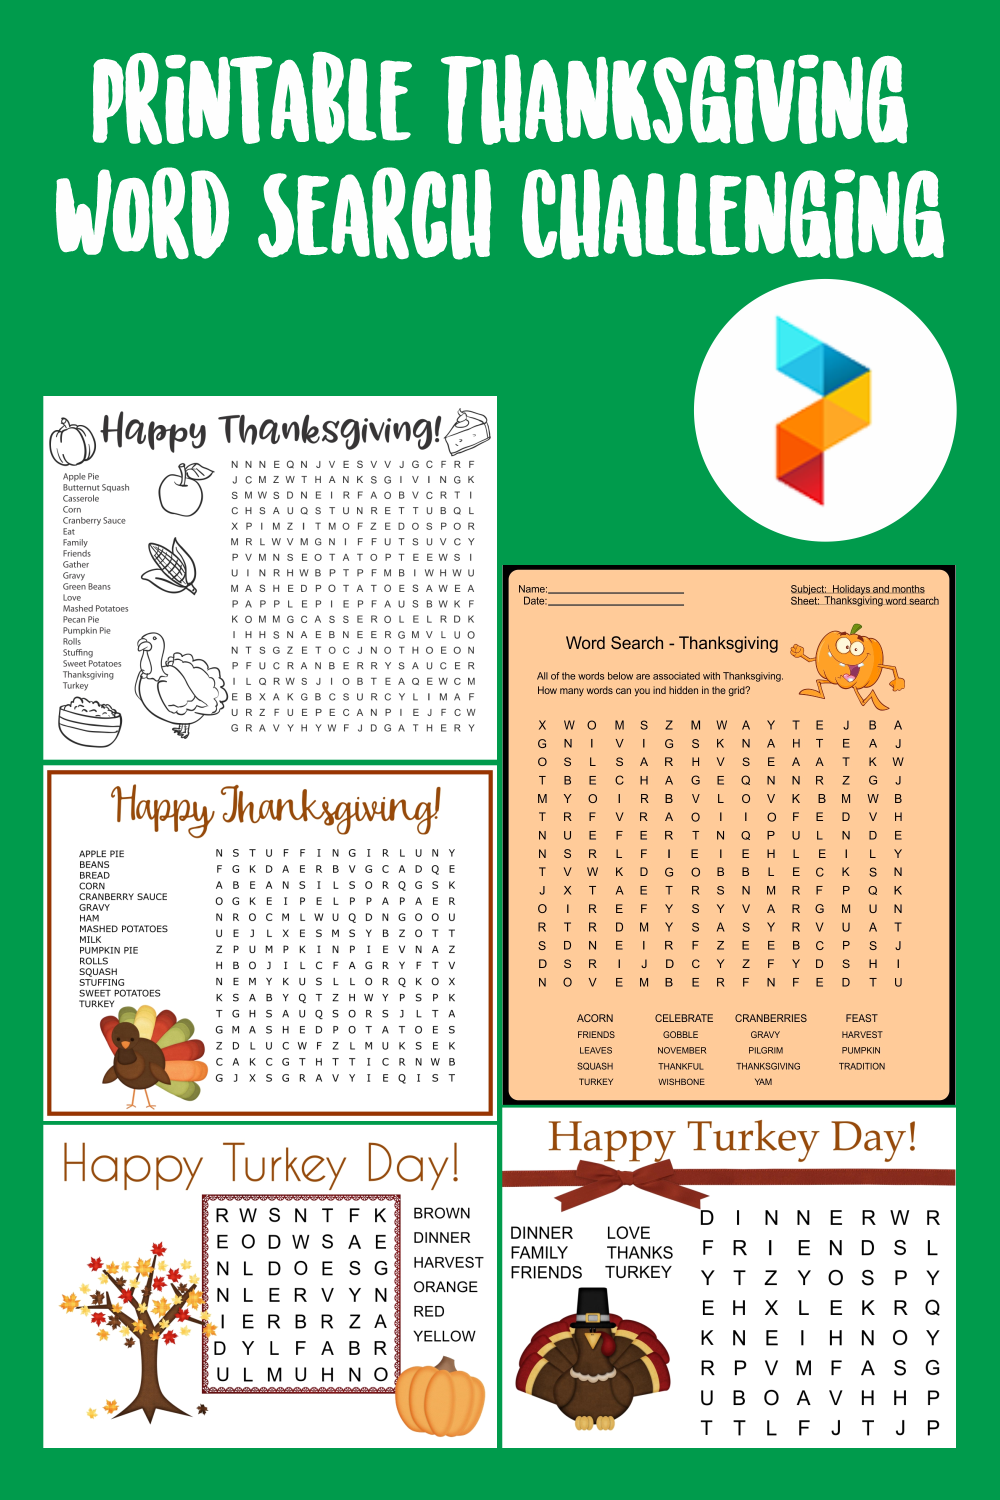 Printable Thanksgiving Word Search Challenging